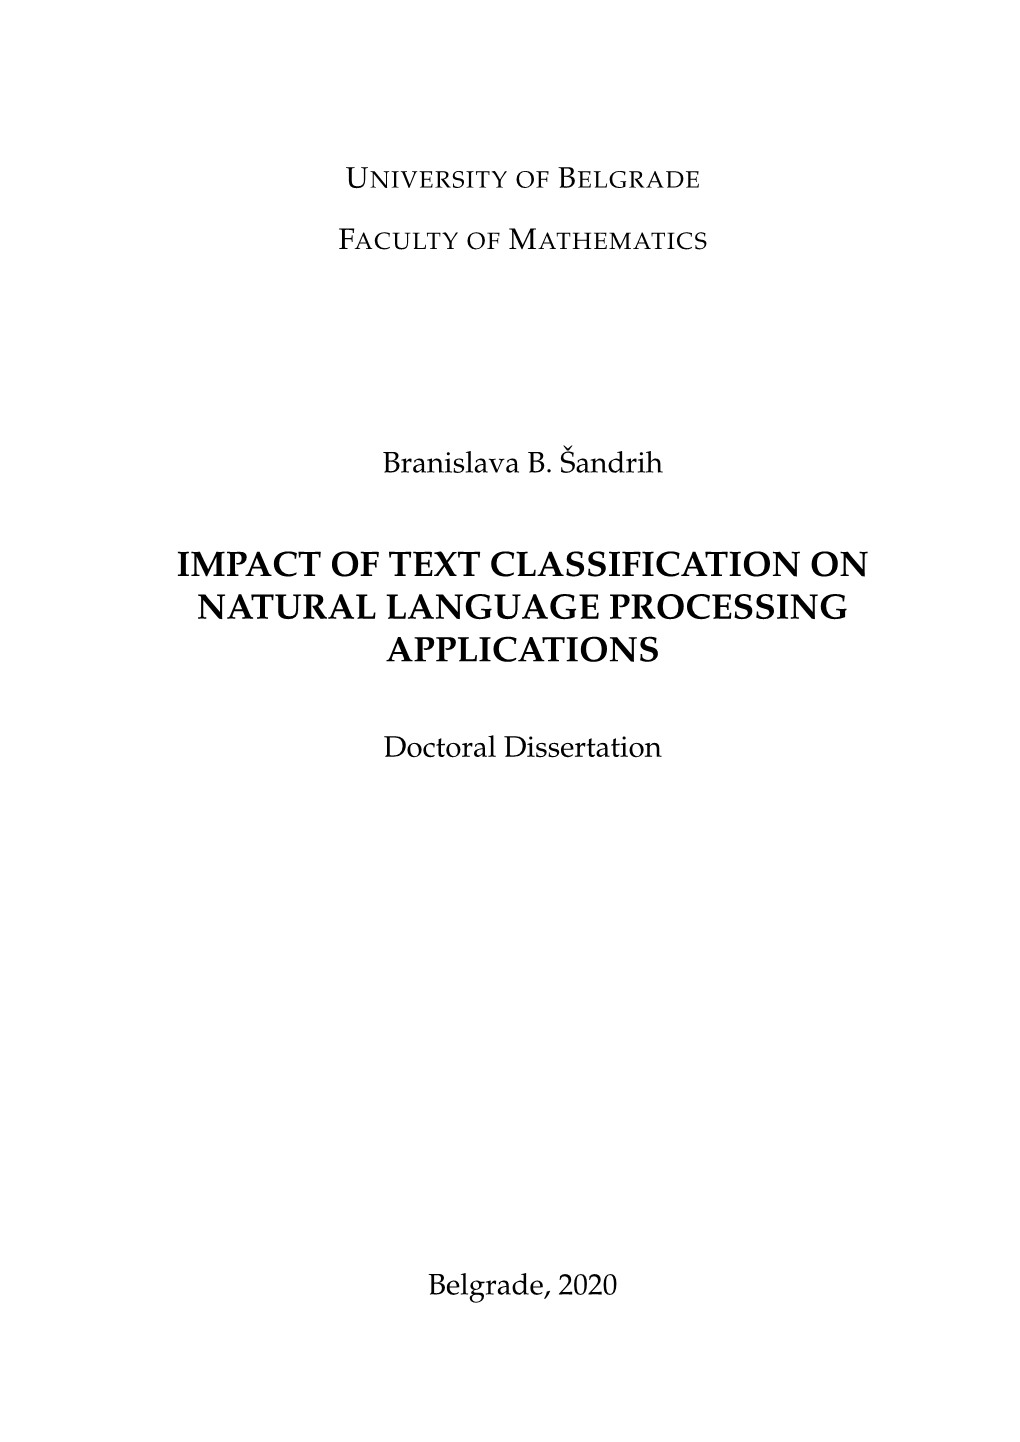 Impact of Text Classification on Natural Language Processing Applications